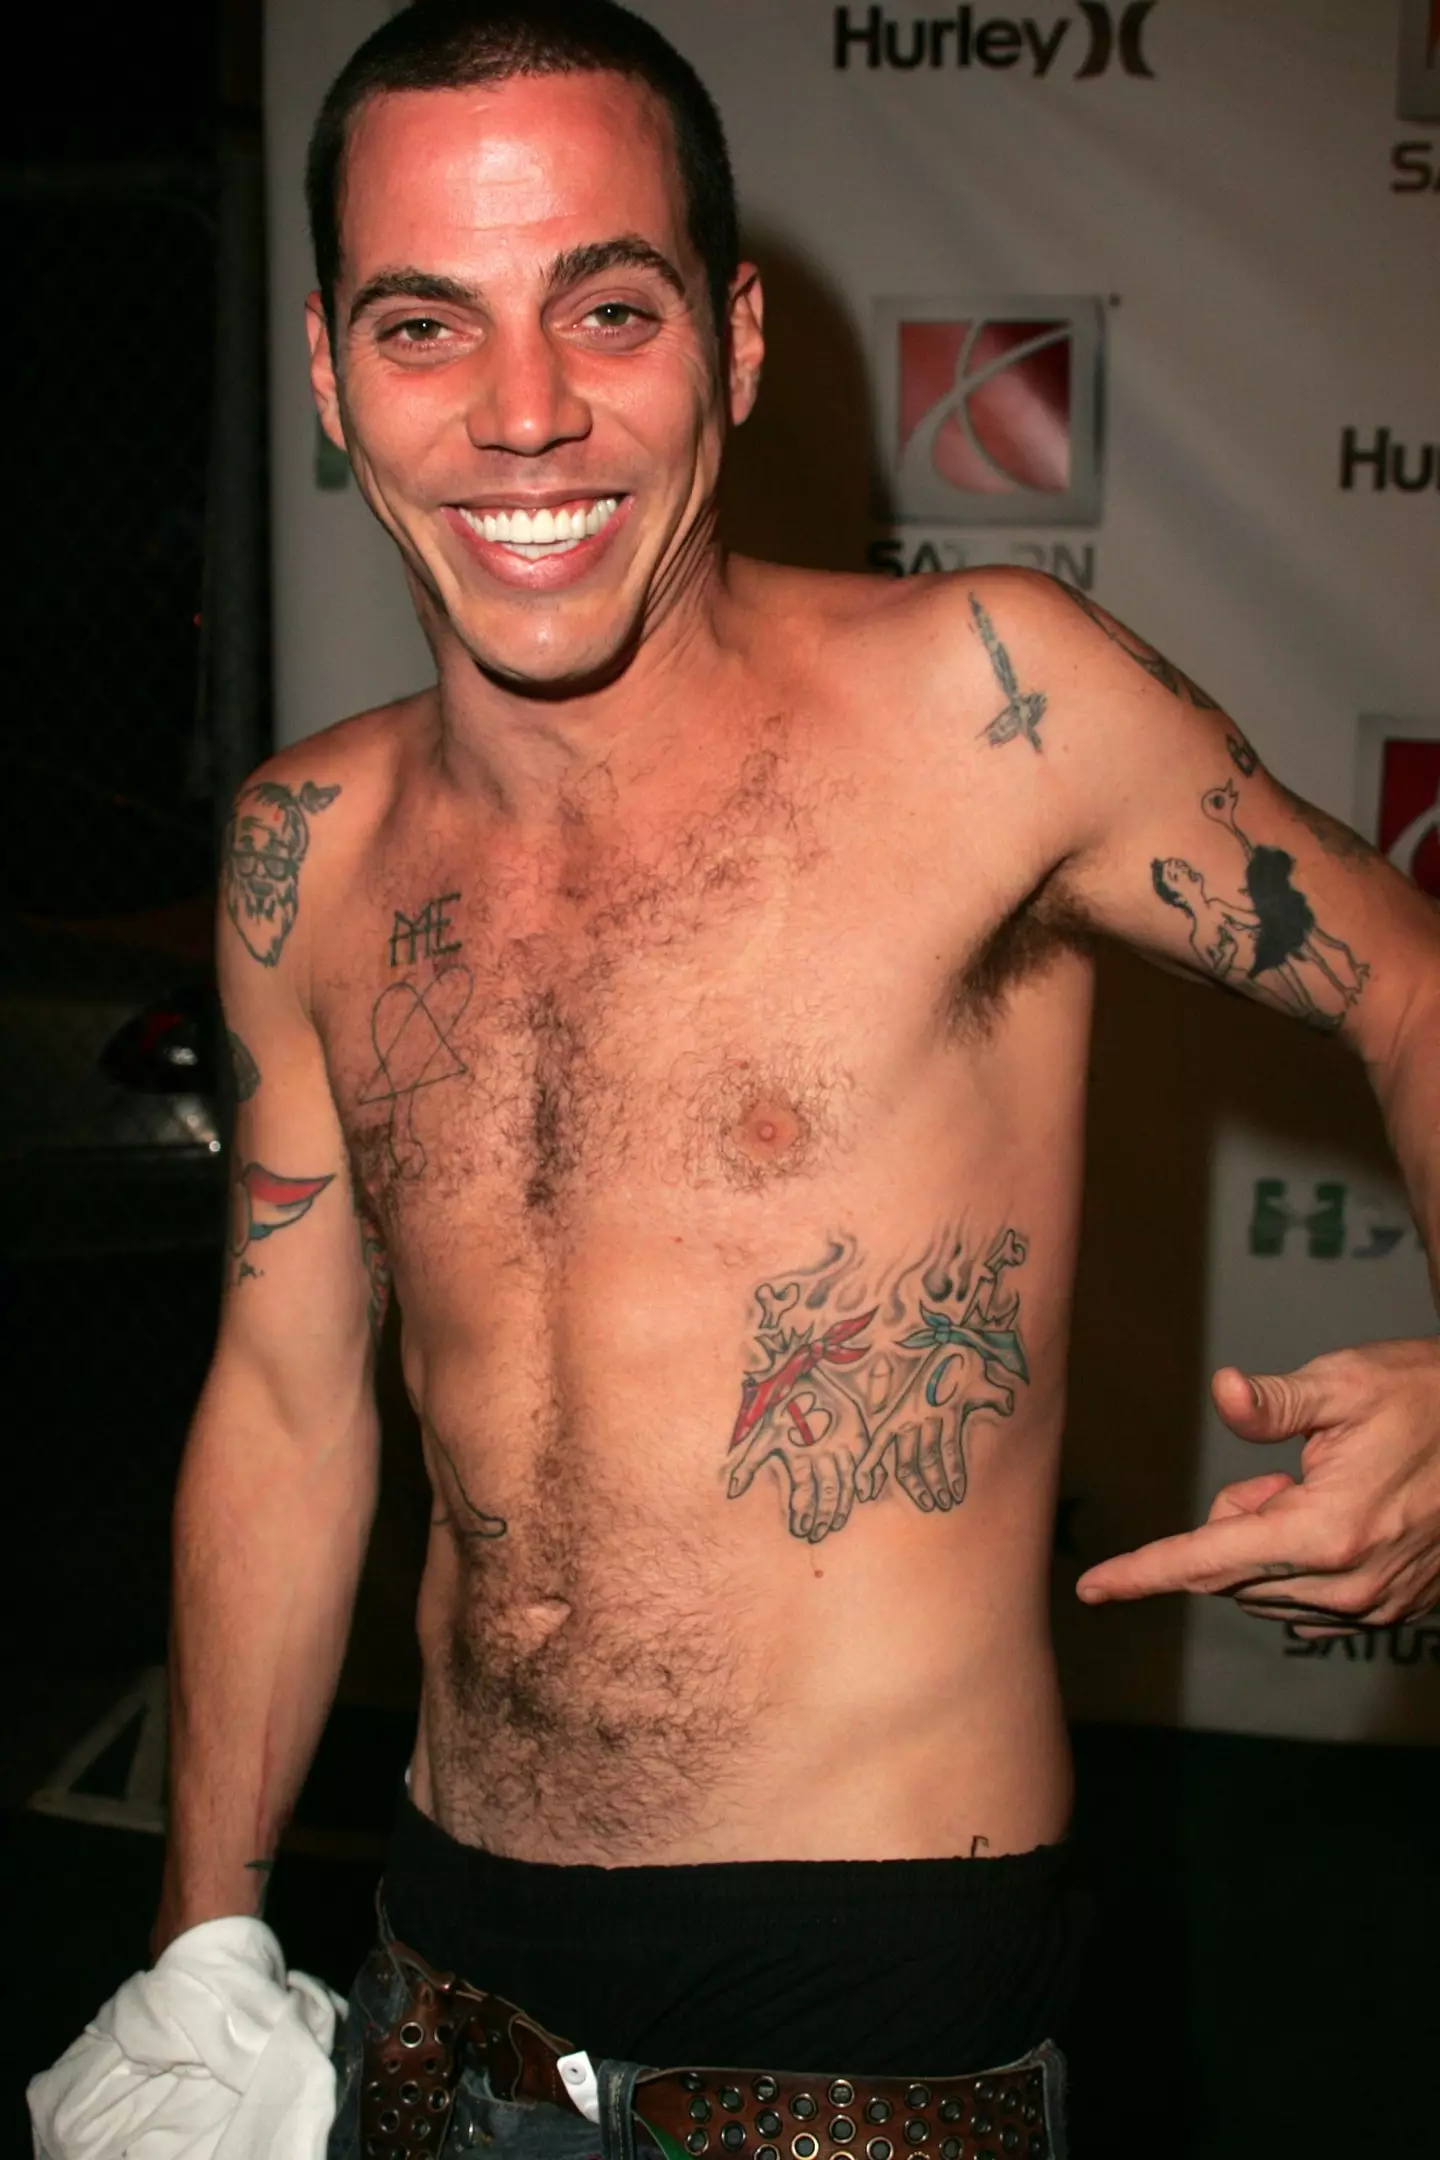 The Jackass star reveals the reason why he had some of his body ink covered up.